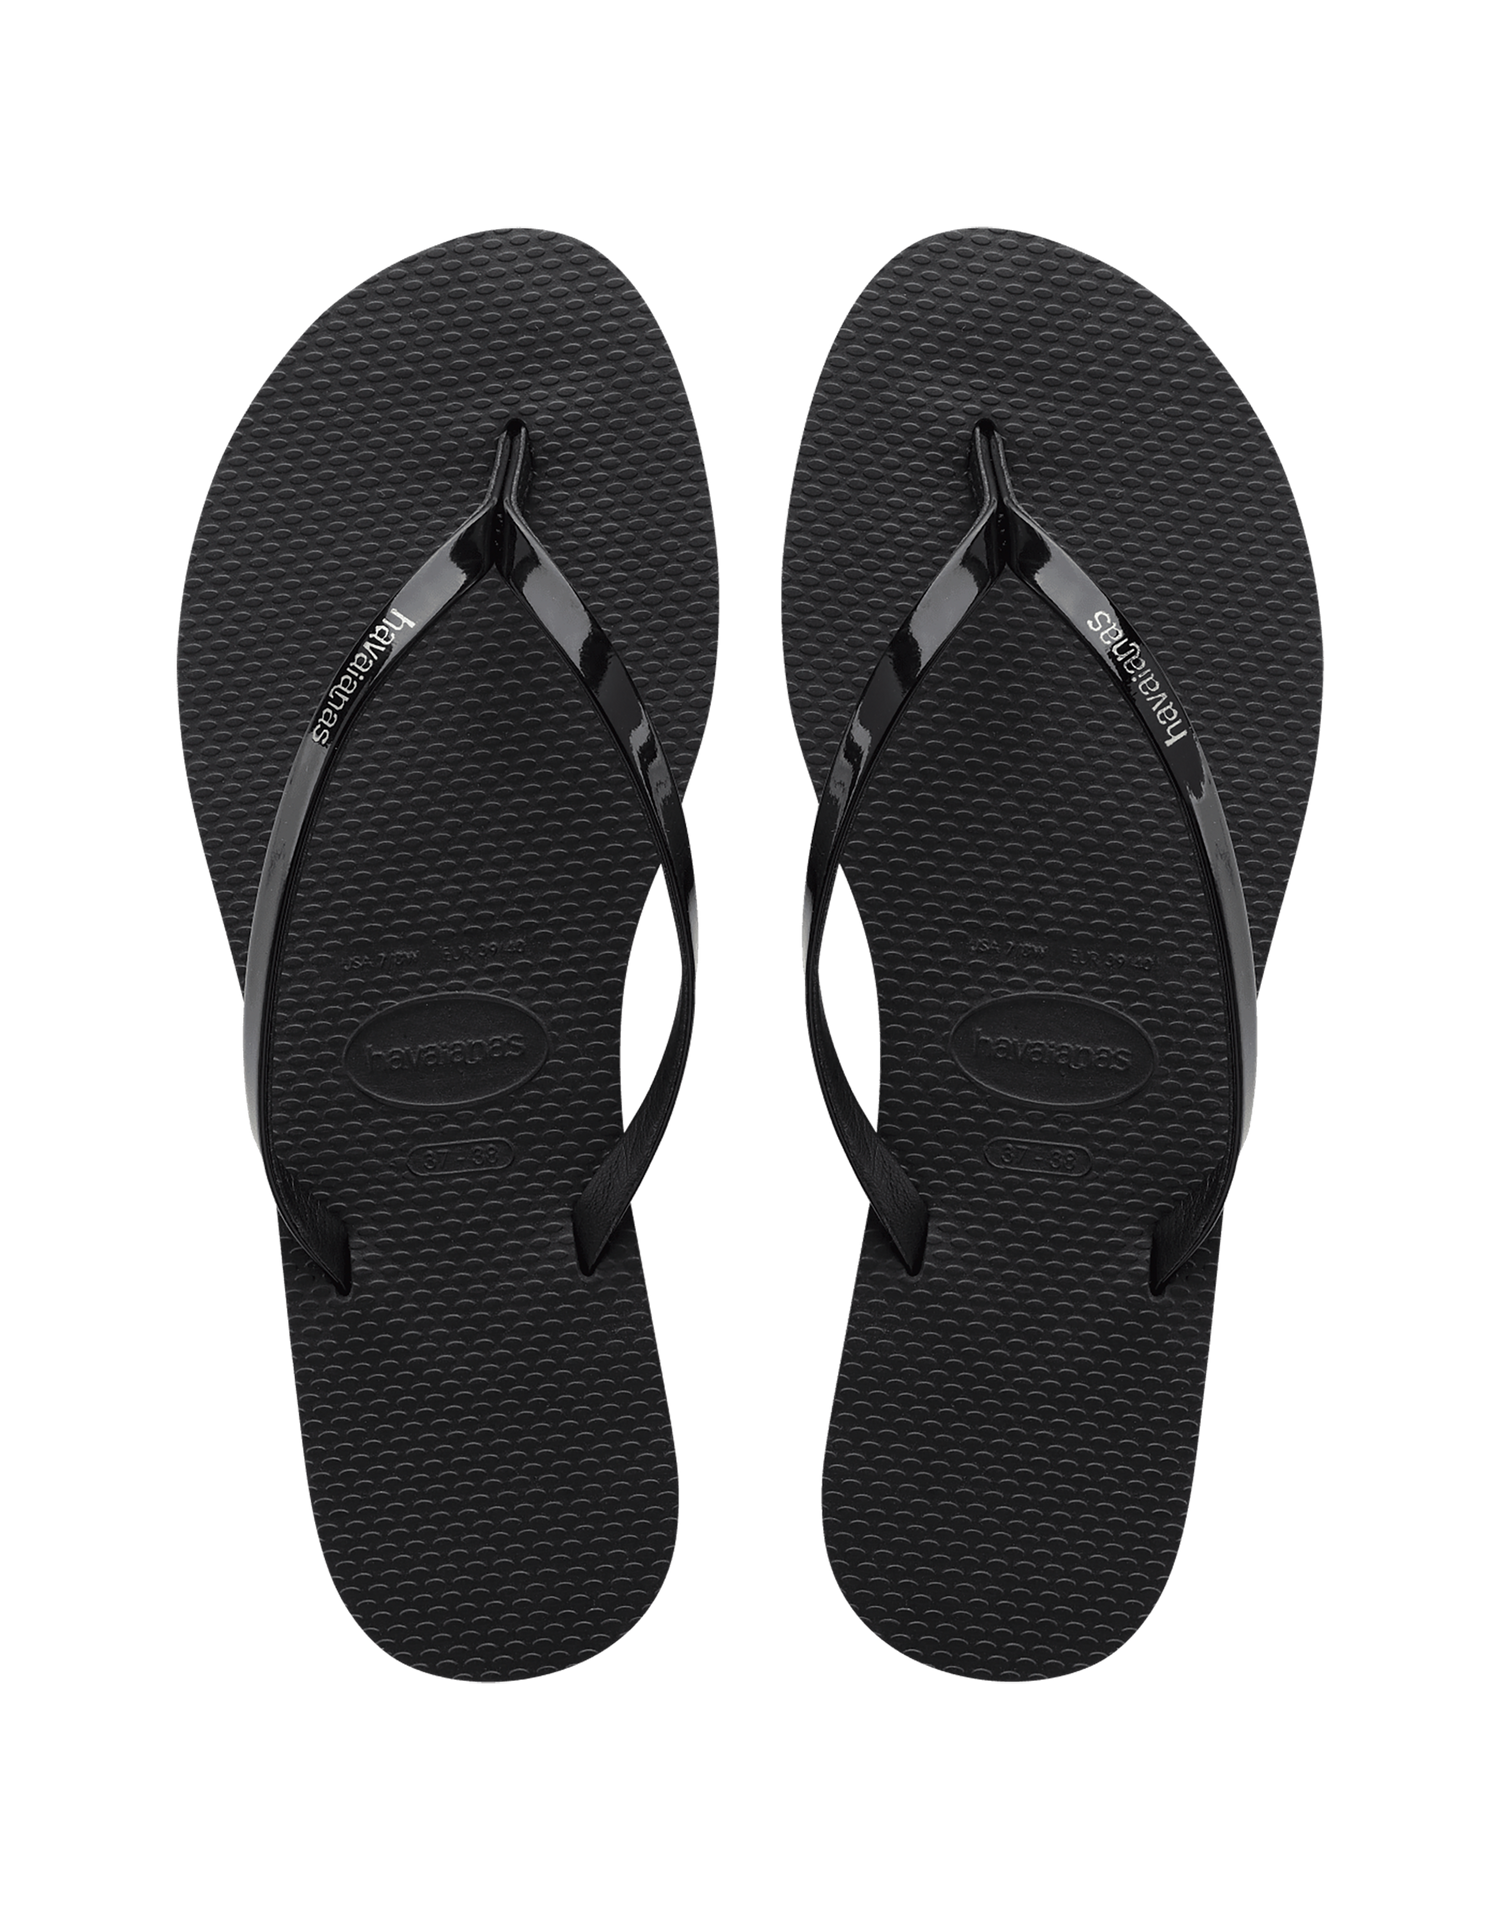 You Metallic Sandal by Havaianas in Black - Front View